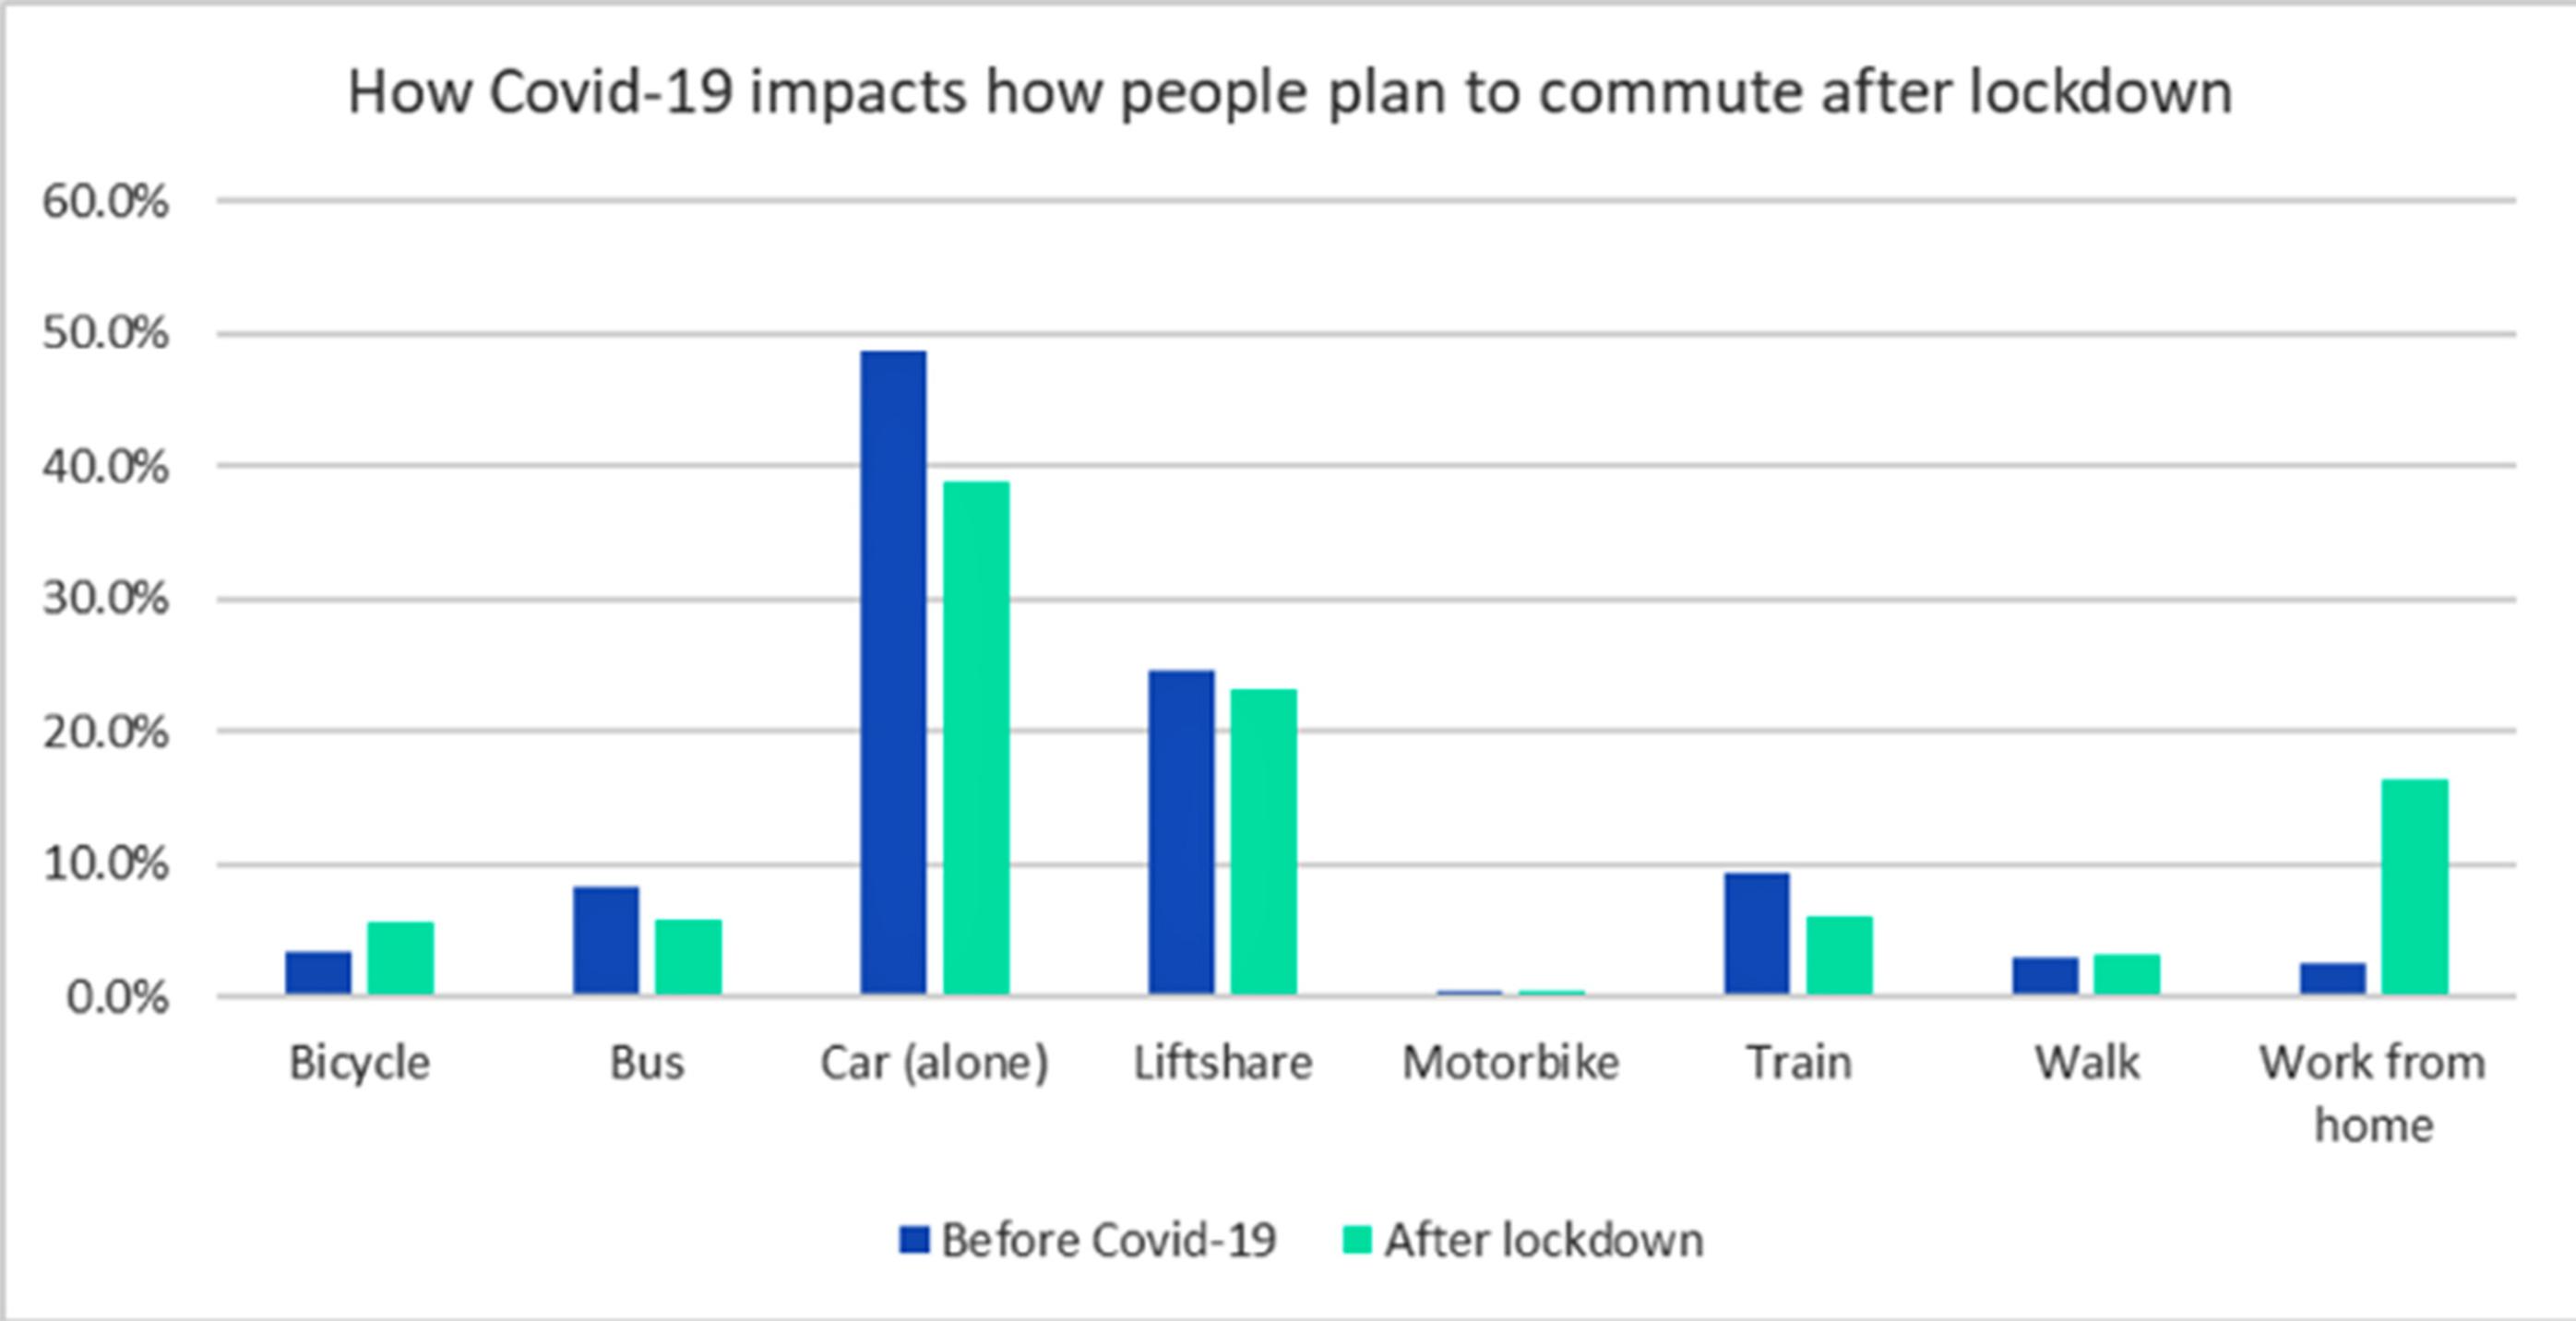 A survey in May showed that 48% planned to commute differently post Covid